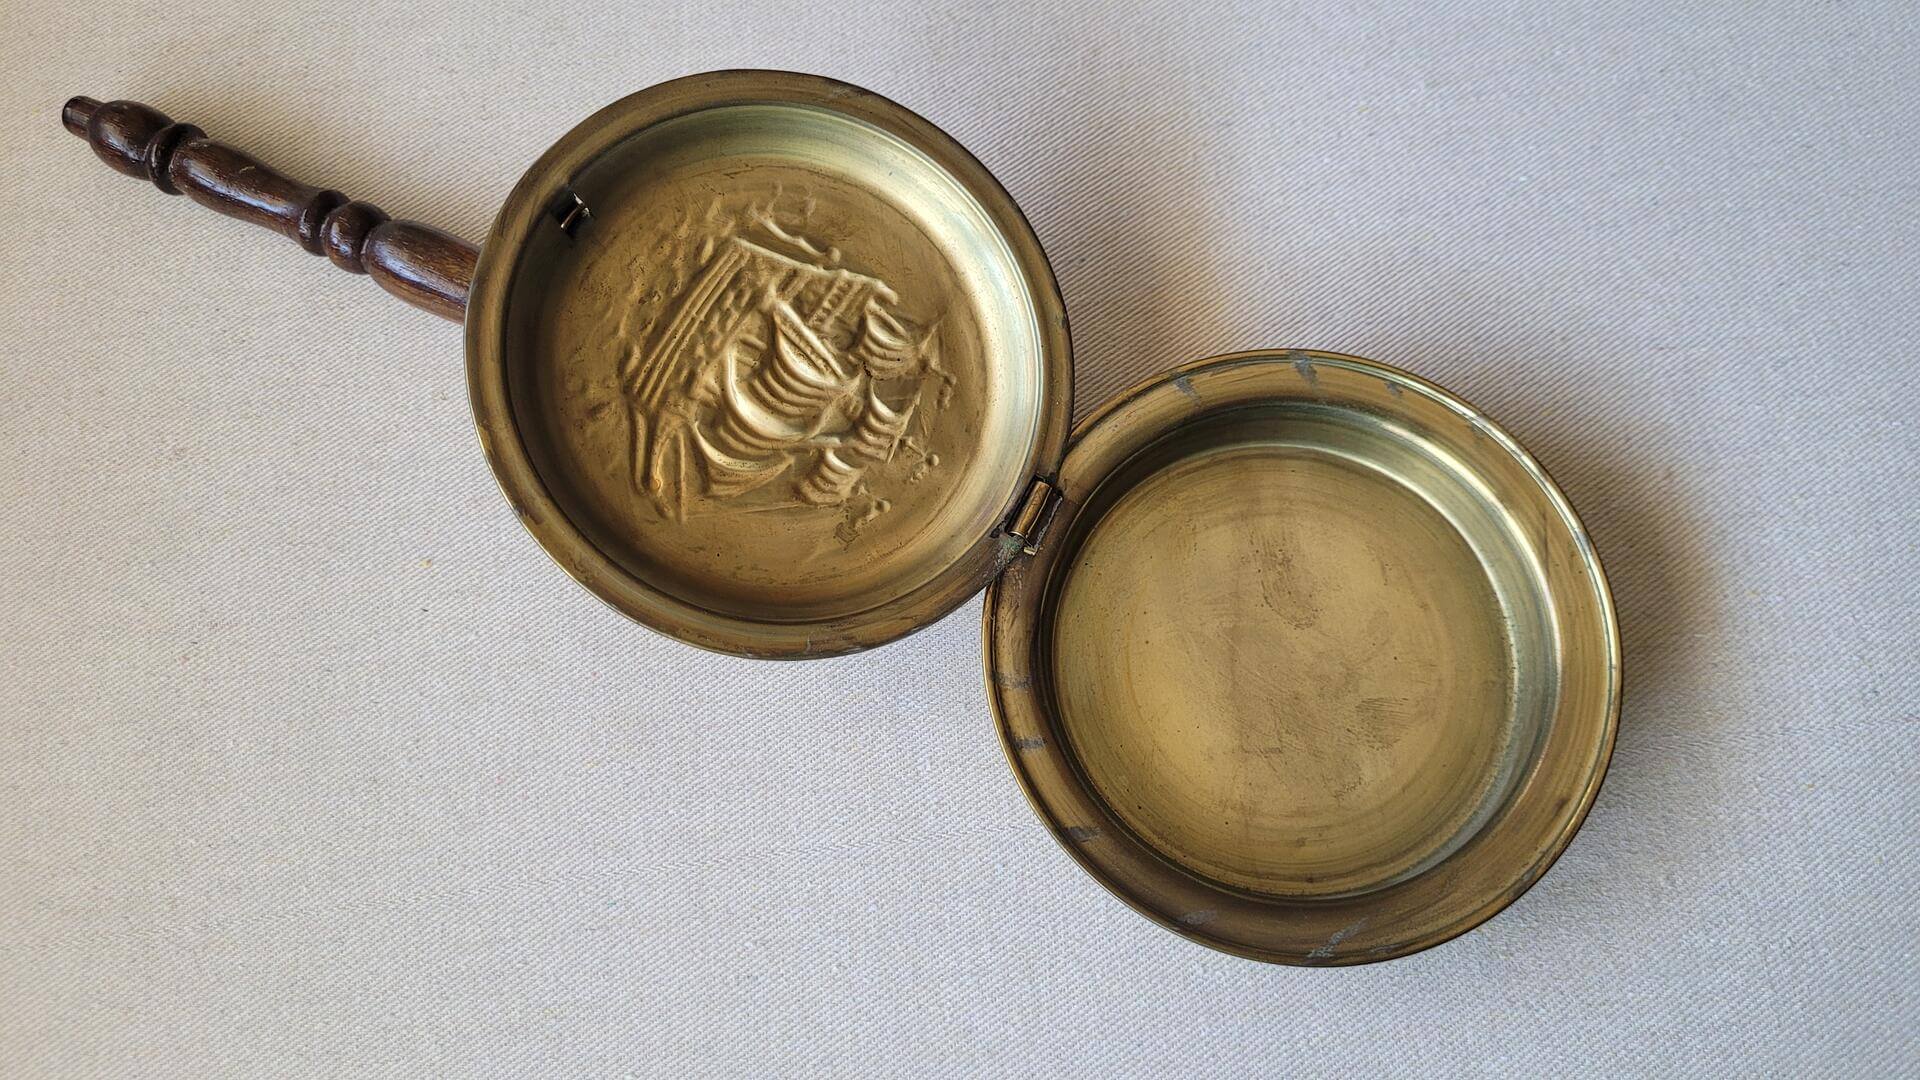 Lombard silent butler ash and crumb catcher w engraved ship motif on lid, brass & wooden handle. Antique made in England collectible dinnerware & serveware